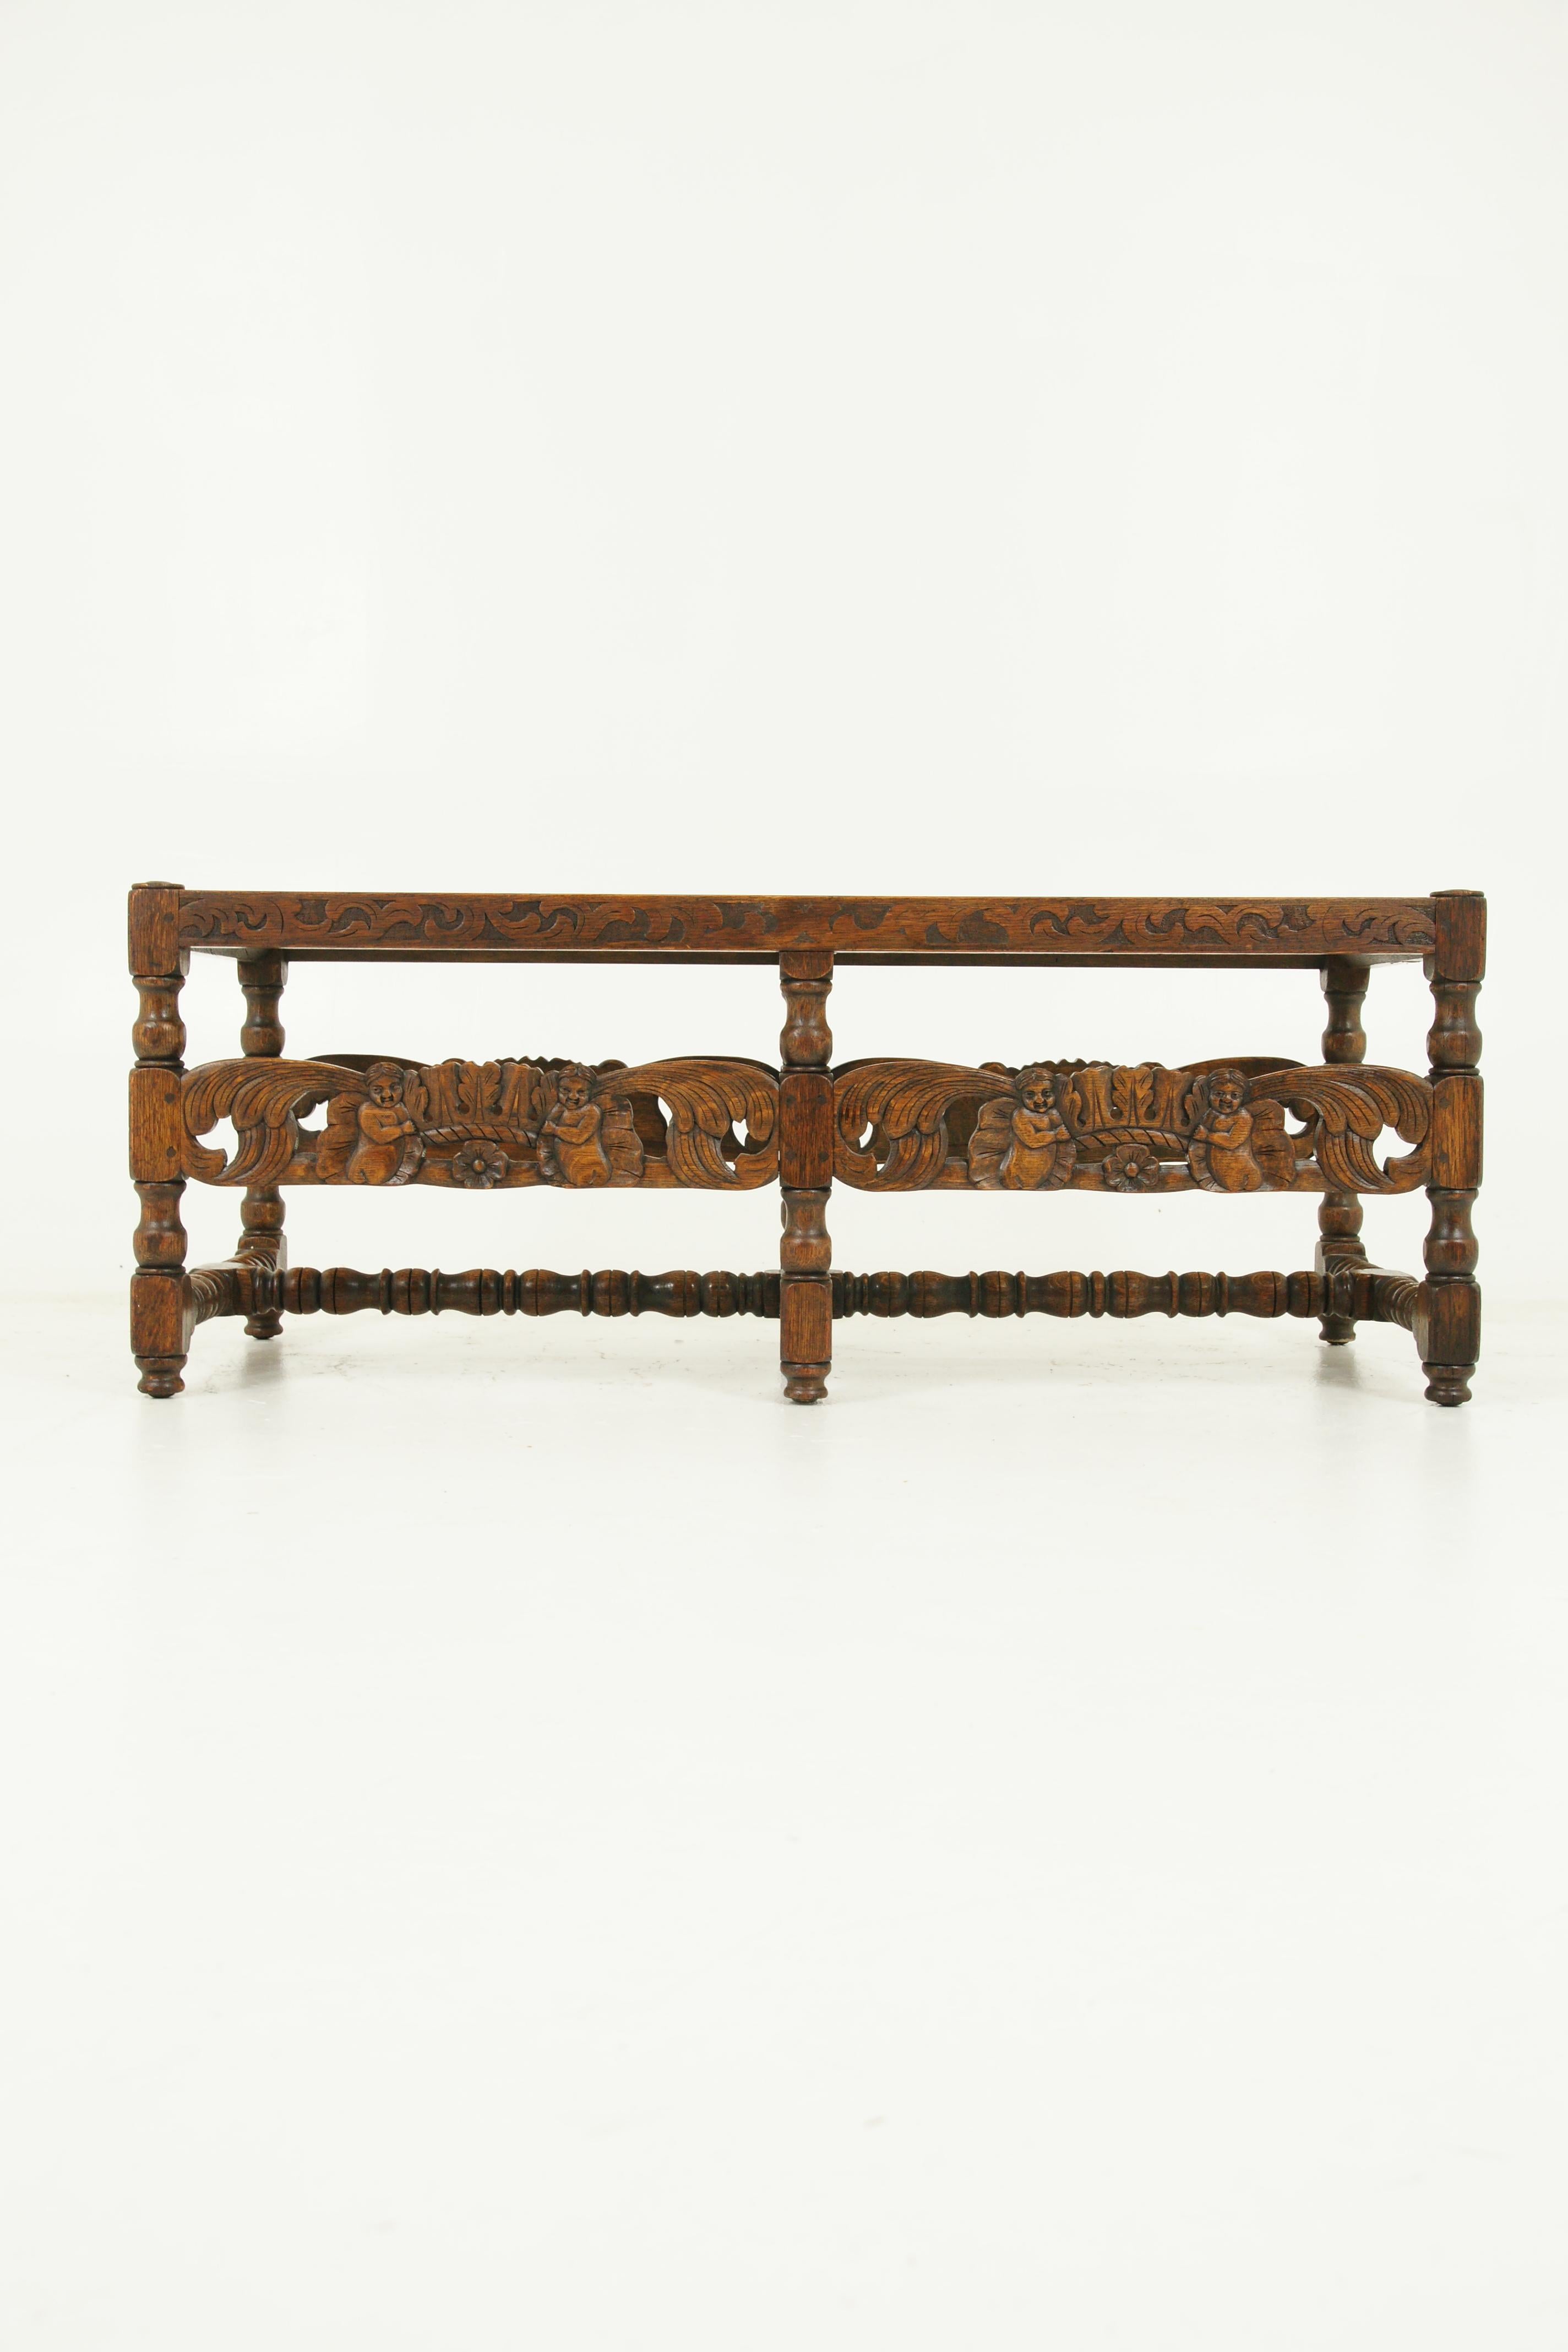 Antique carved bench, footstool, window seat, heavily carved, W and J Sloane, USA 1920s, Antique Furniture, B1609

USA, 1920s
Solid oak construction
Original finish
Caned with carved frame
Standing on 6 turned legs
Wonderful carved stretchers below